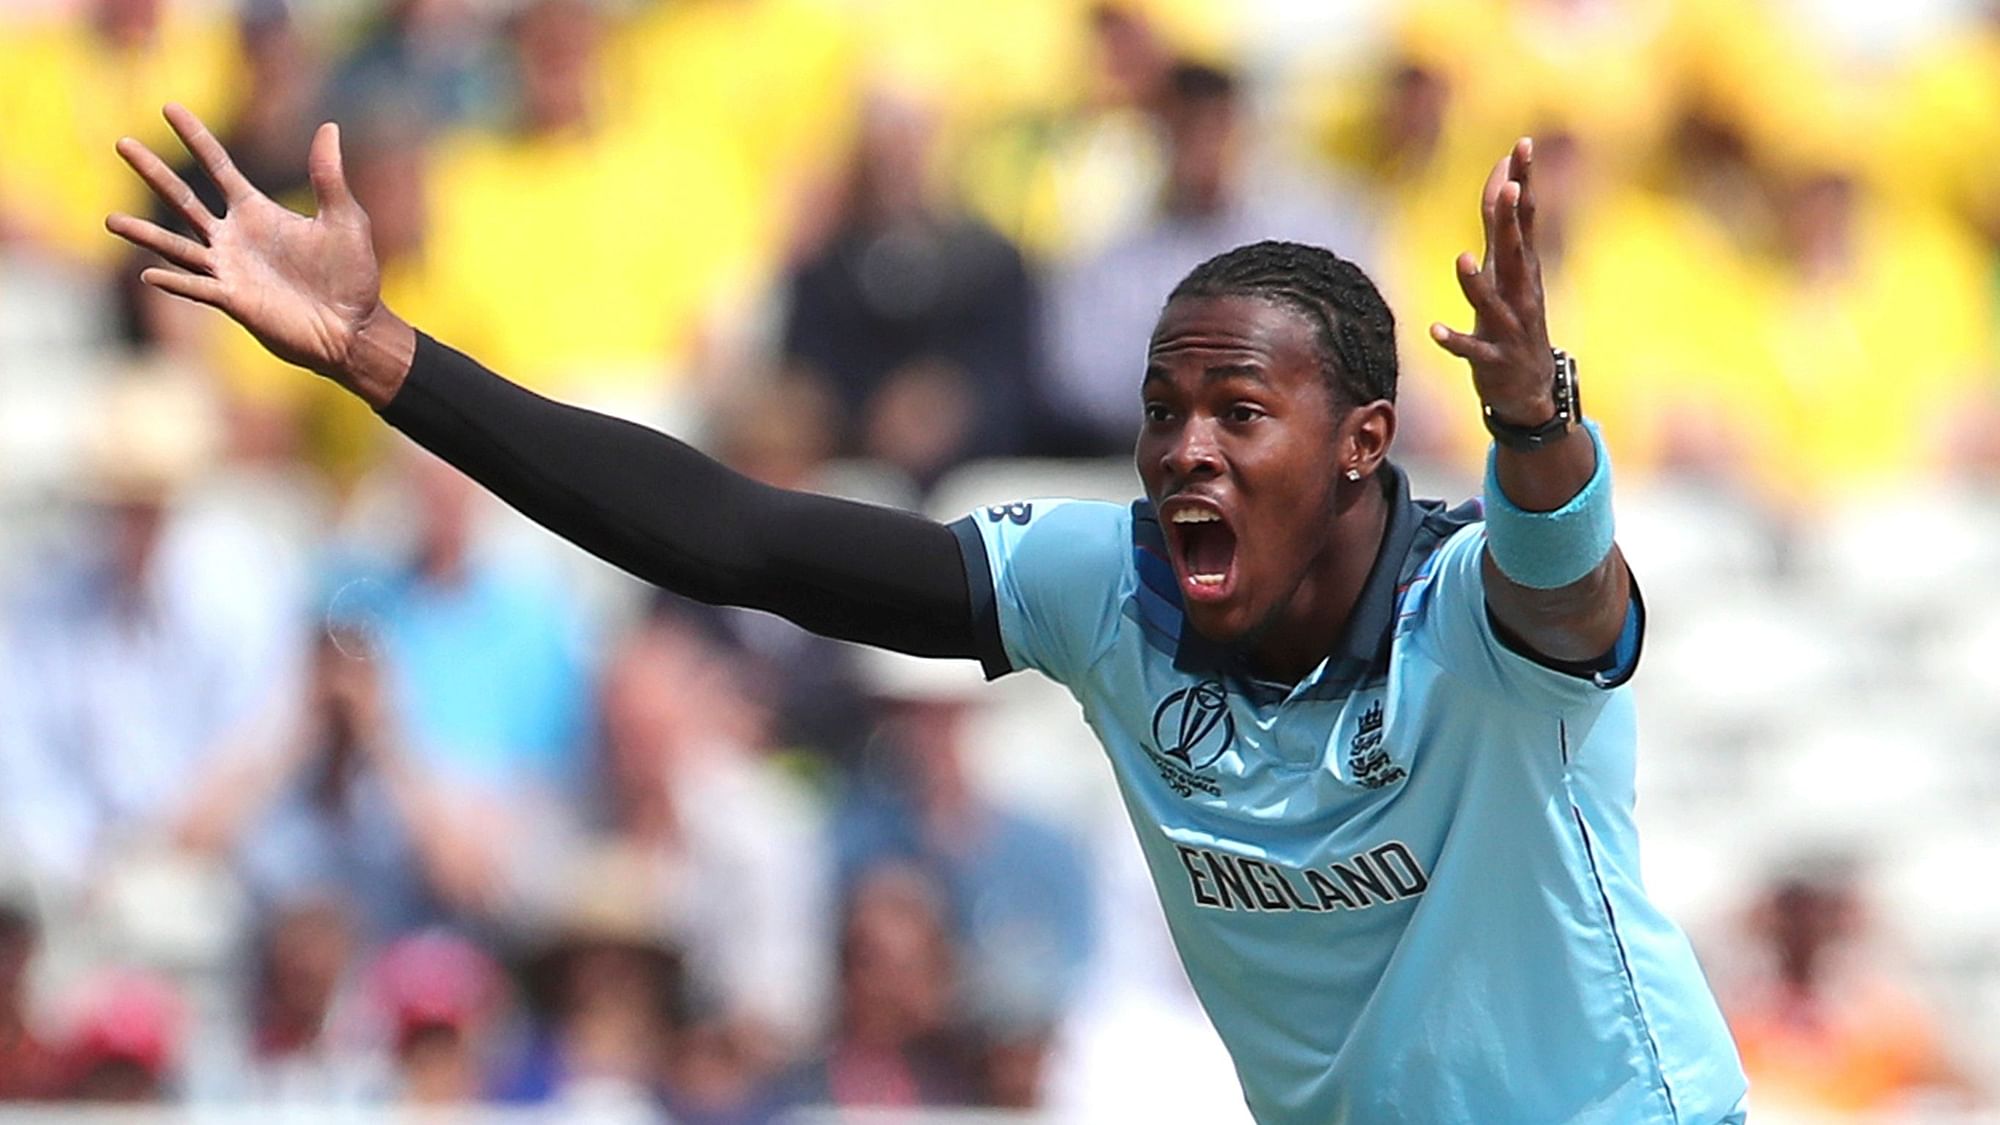 England star Jofra Archer was grieving over the death of his cousin in Barbados during his team’s incredible success at the Cricket World Cup.